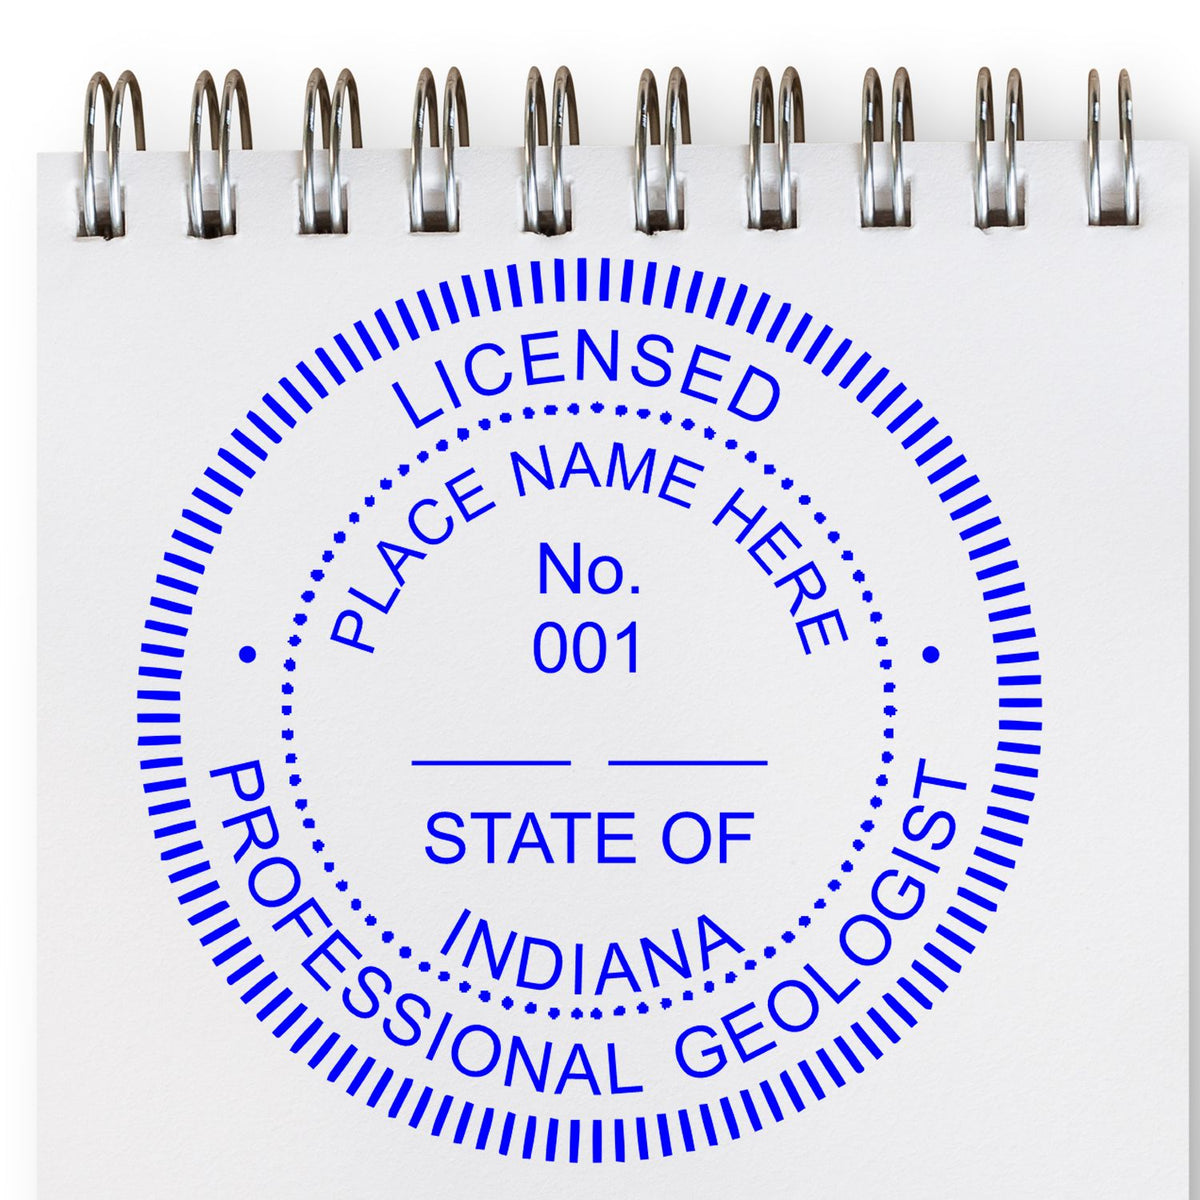 The Slim Pre-Inked Indiana Professional Geologist Seal Stamp  impression comes to life with a crisp, detailed image stamped on paper - showcasing true professional quality.